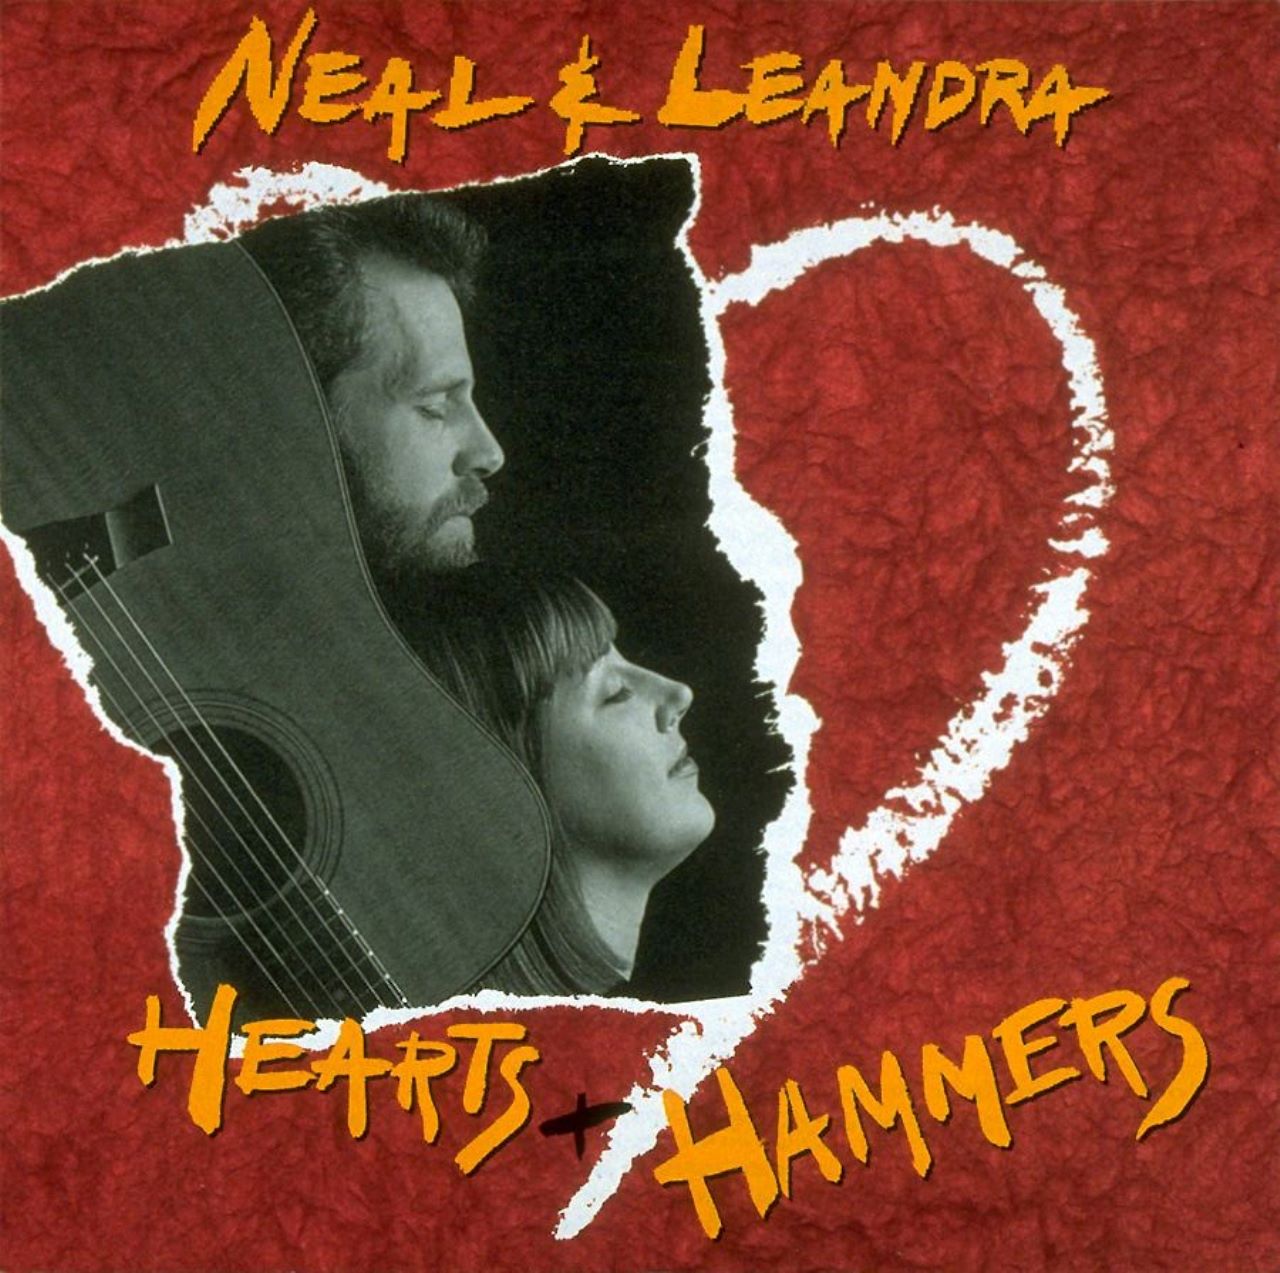 Neal & Leandra - Hearts & Hammers cover album